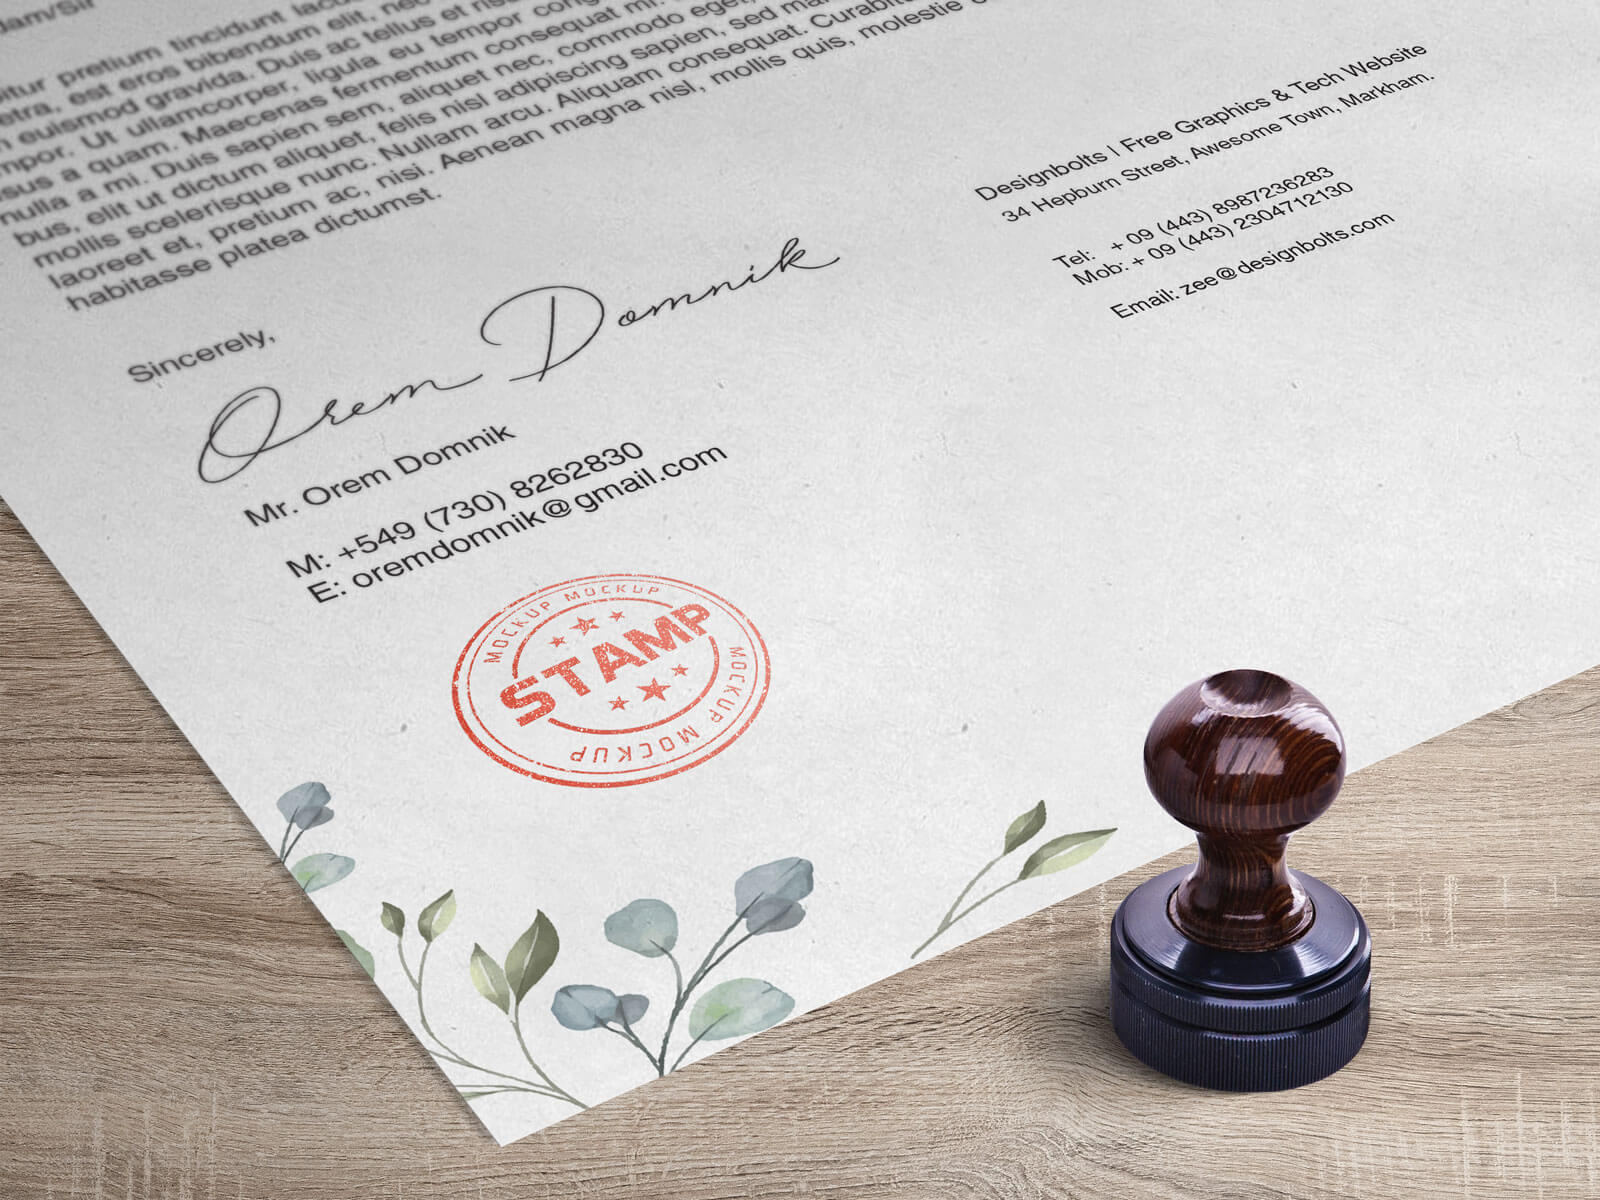 Download Free Corporate Round Stamp on Letterhead Mockup PSD | Designbolts